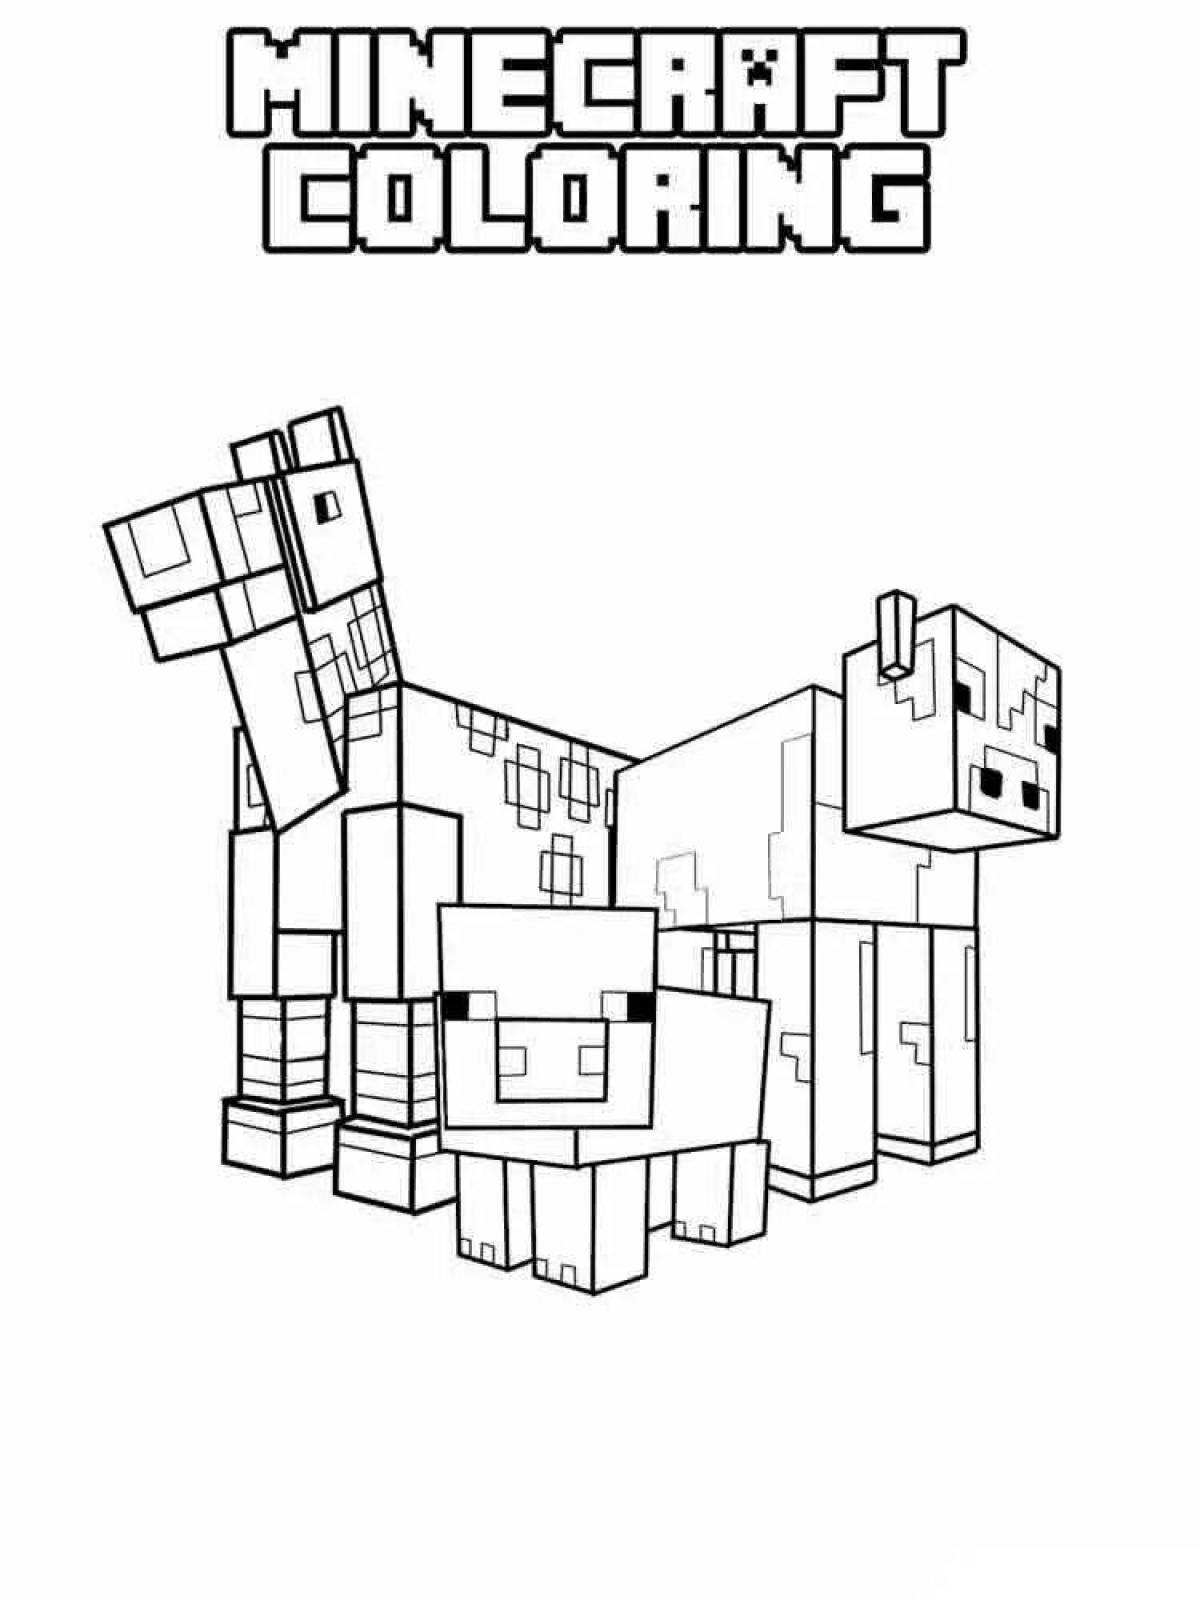 Lovely minecraft animal coloring page